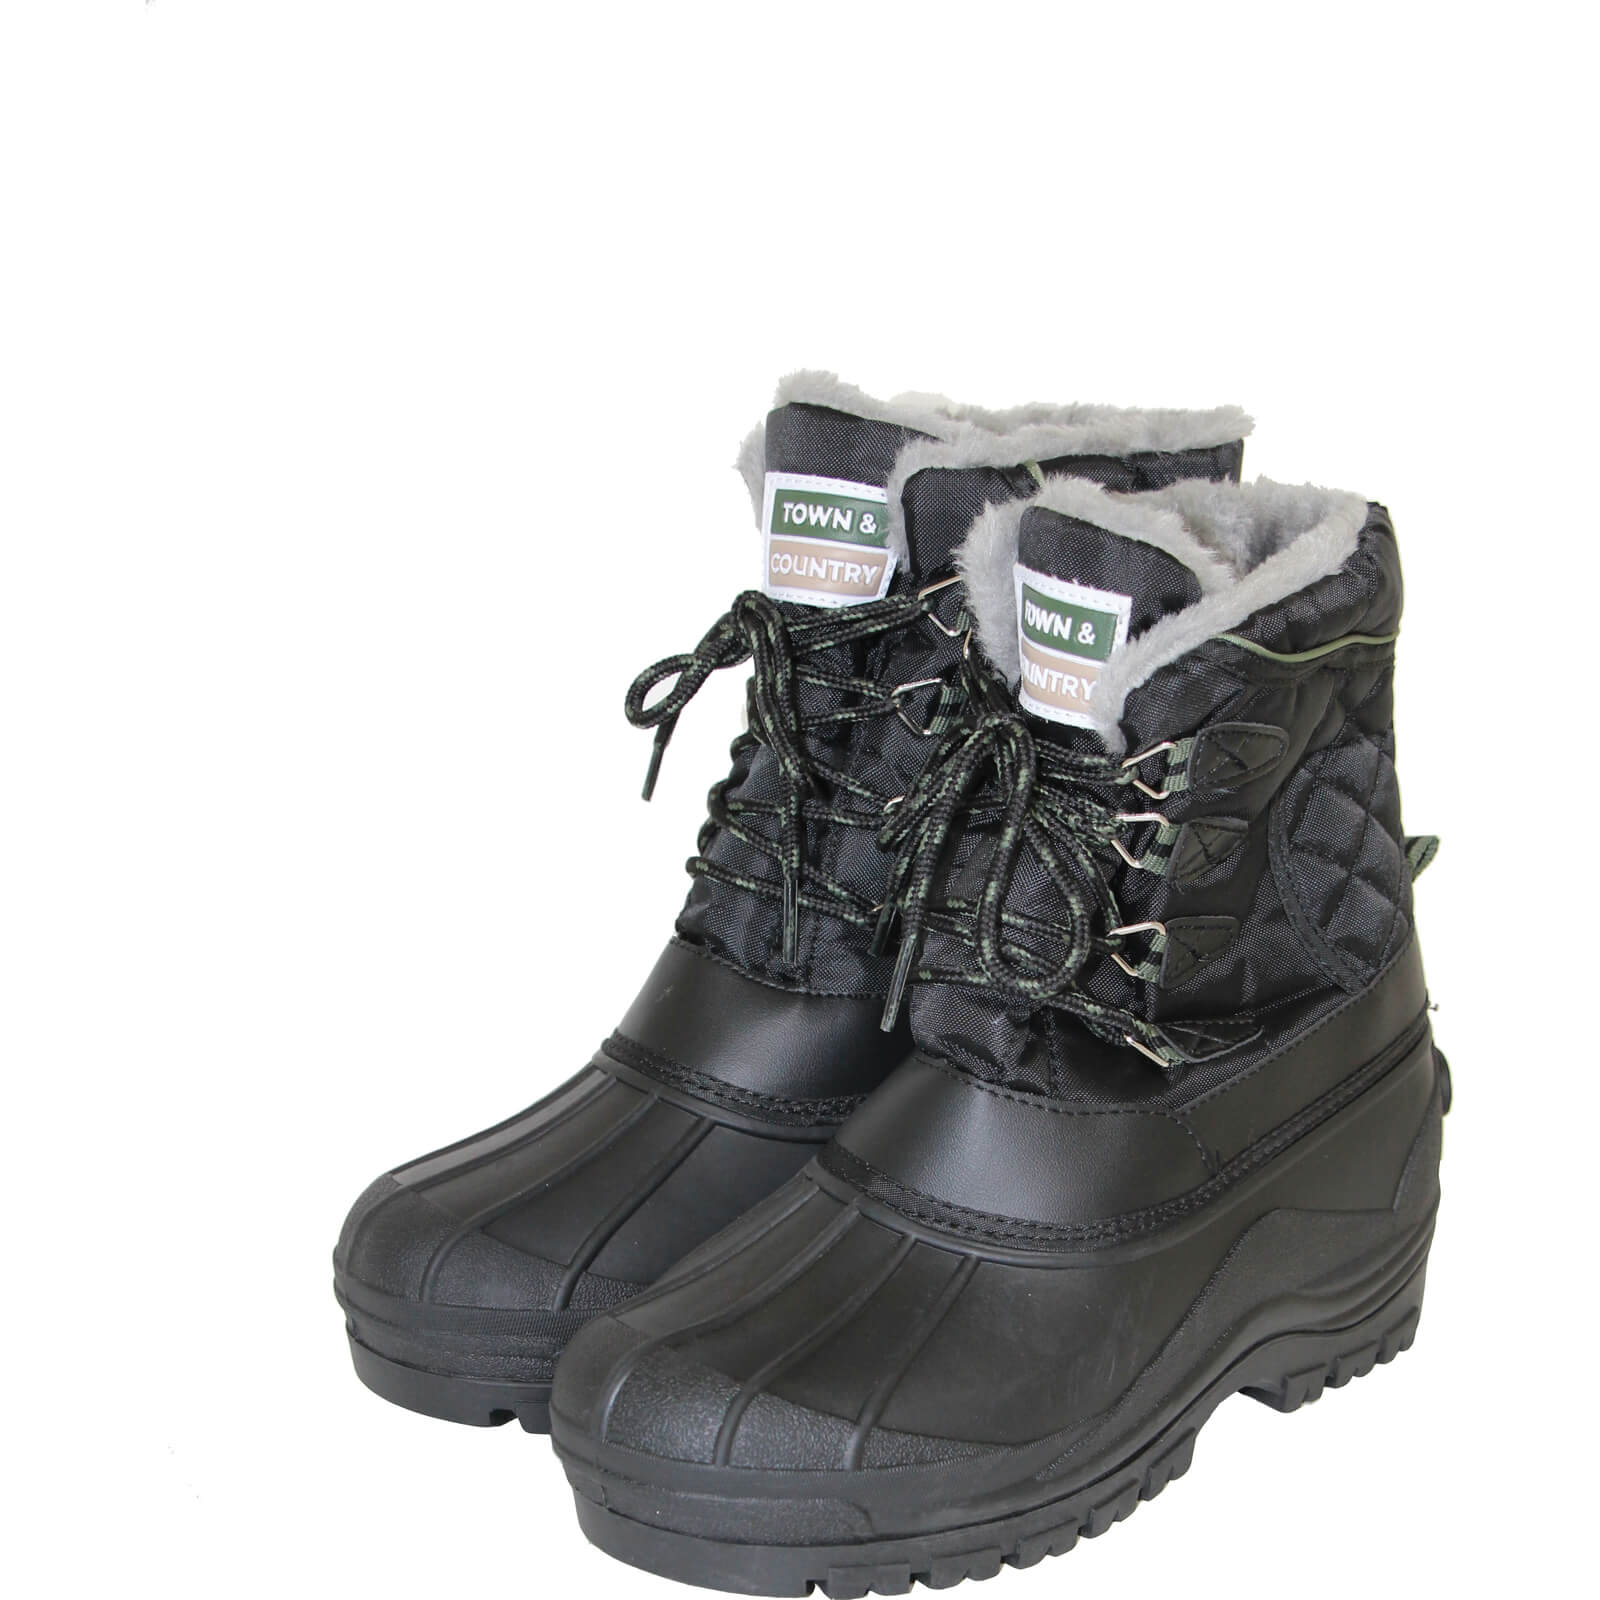 Image of Town and Country Curbridge Waterproof Lined Winter Boots Black Size 9